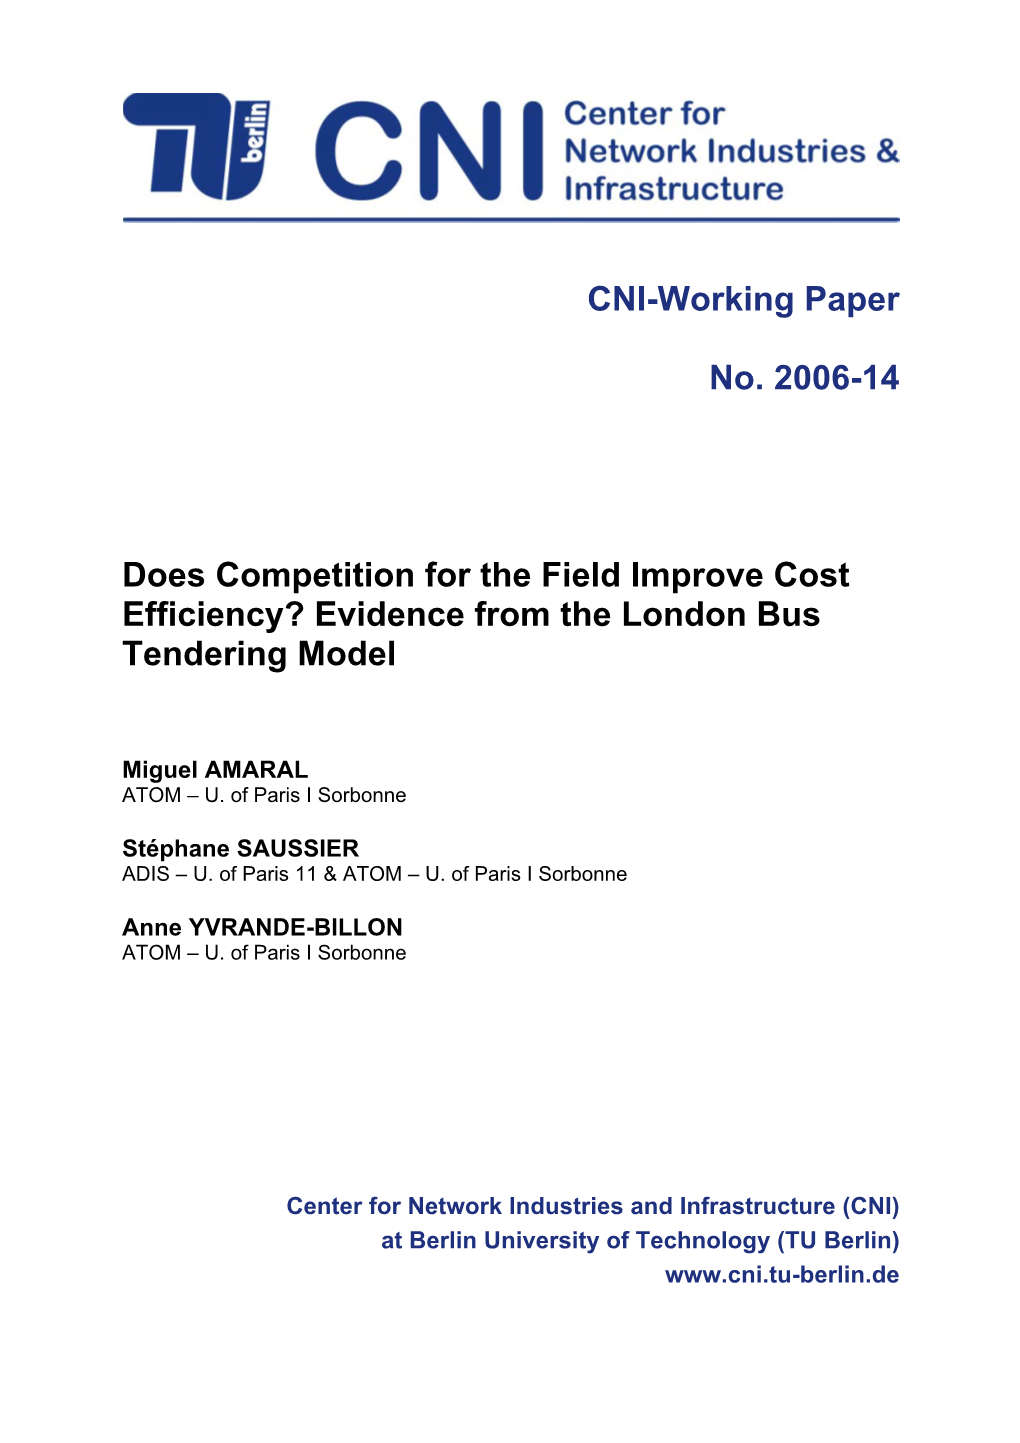 CNI-Working Paper No. 2006-14 Does Competition for the Field Improve